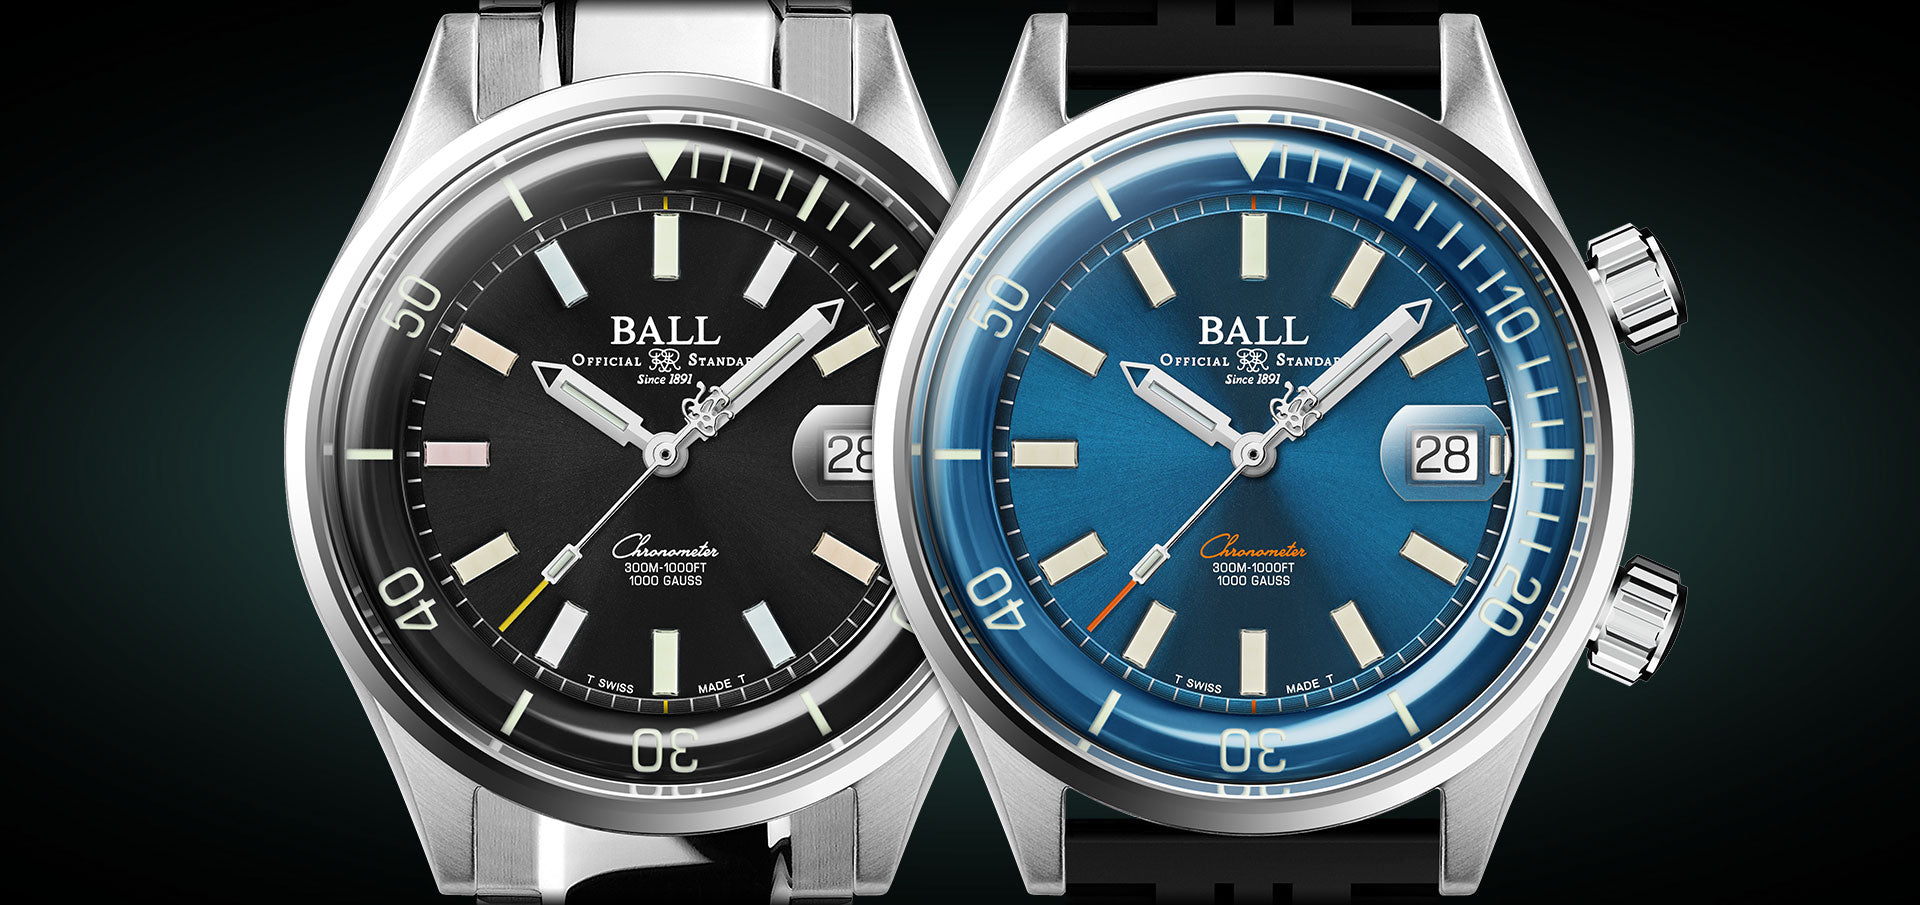 PREORDER BALL DM2280A-P1C-BER Engineer Master II Diver LIMITED EDITION Chronometer Rainbow Dial Watch